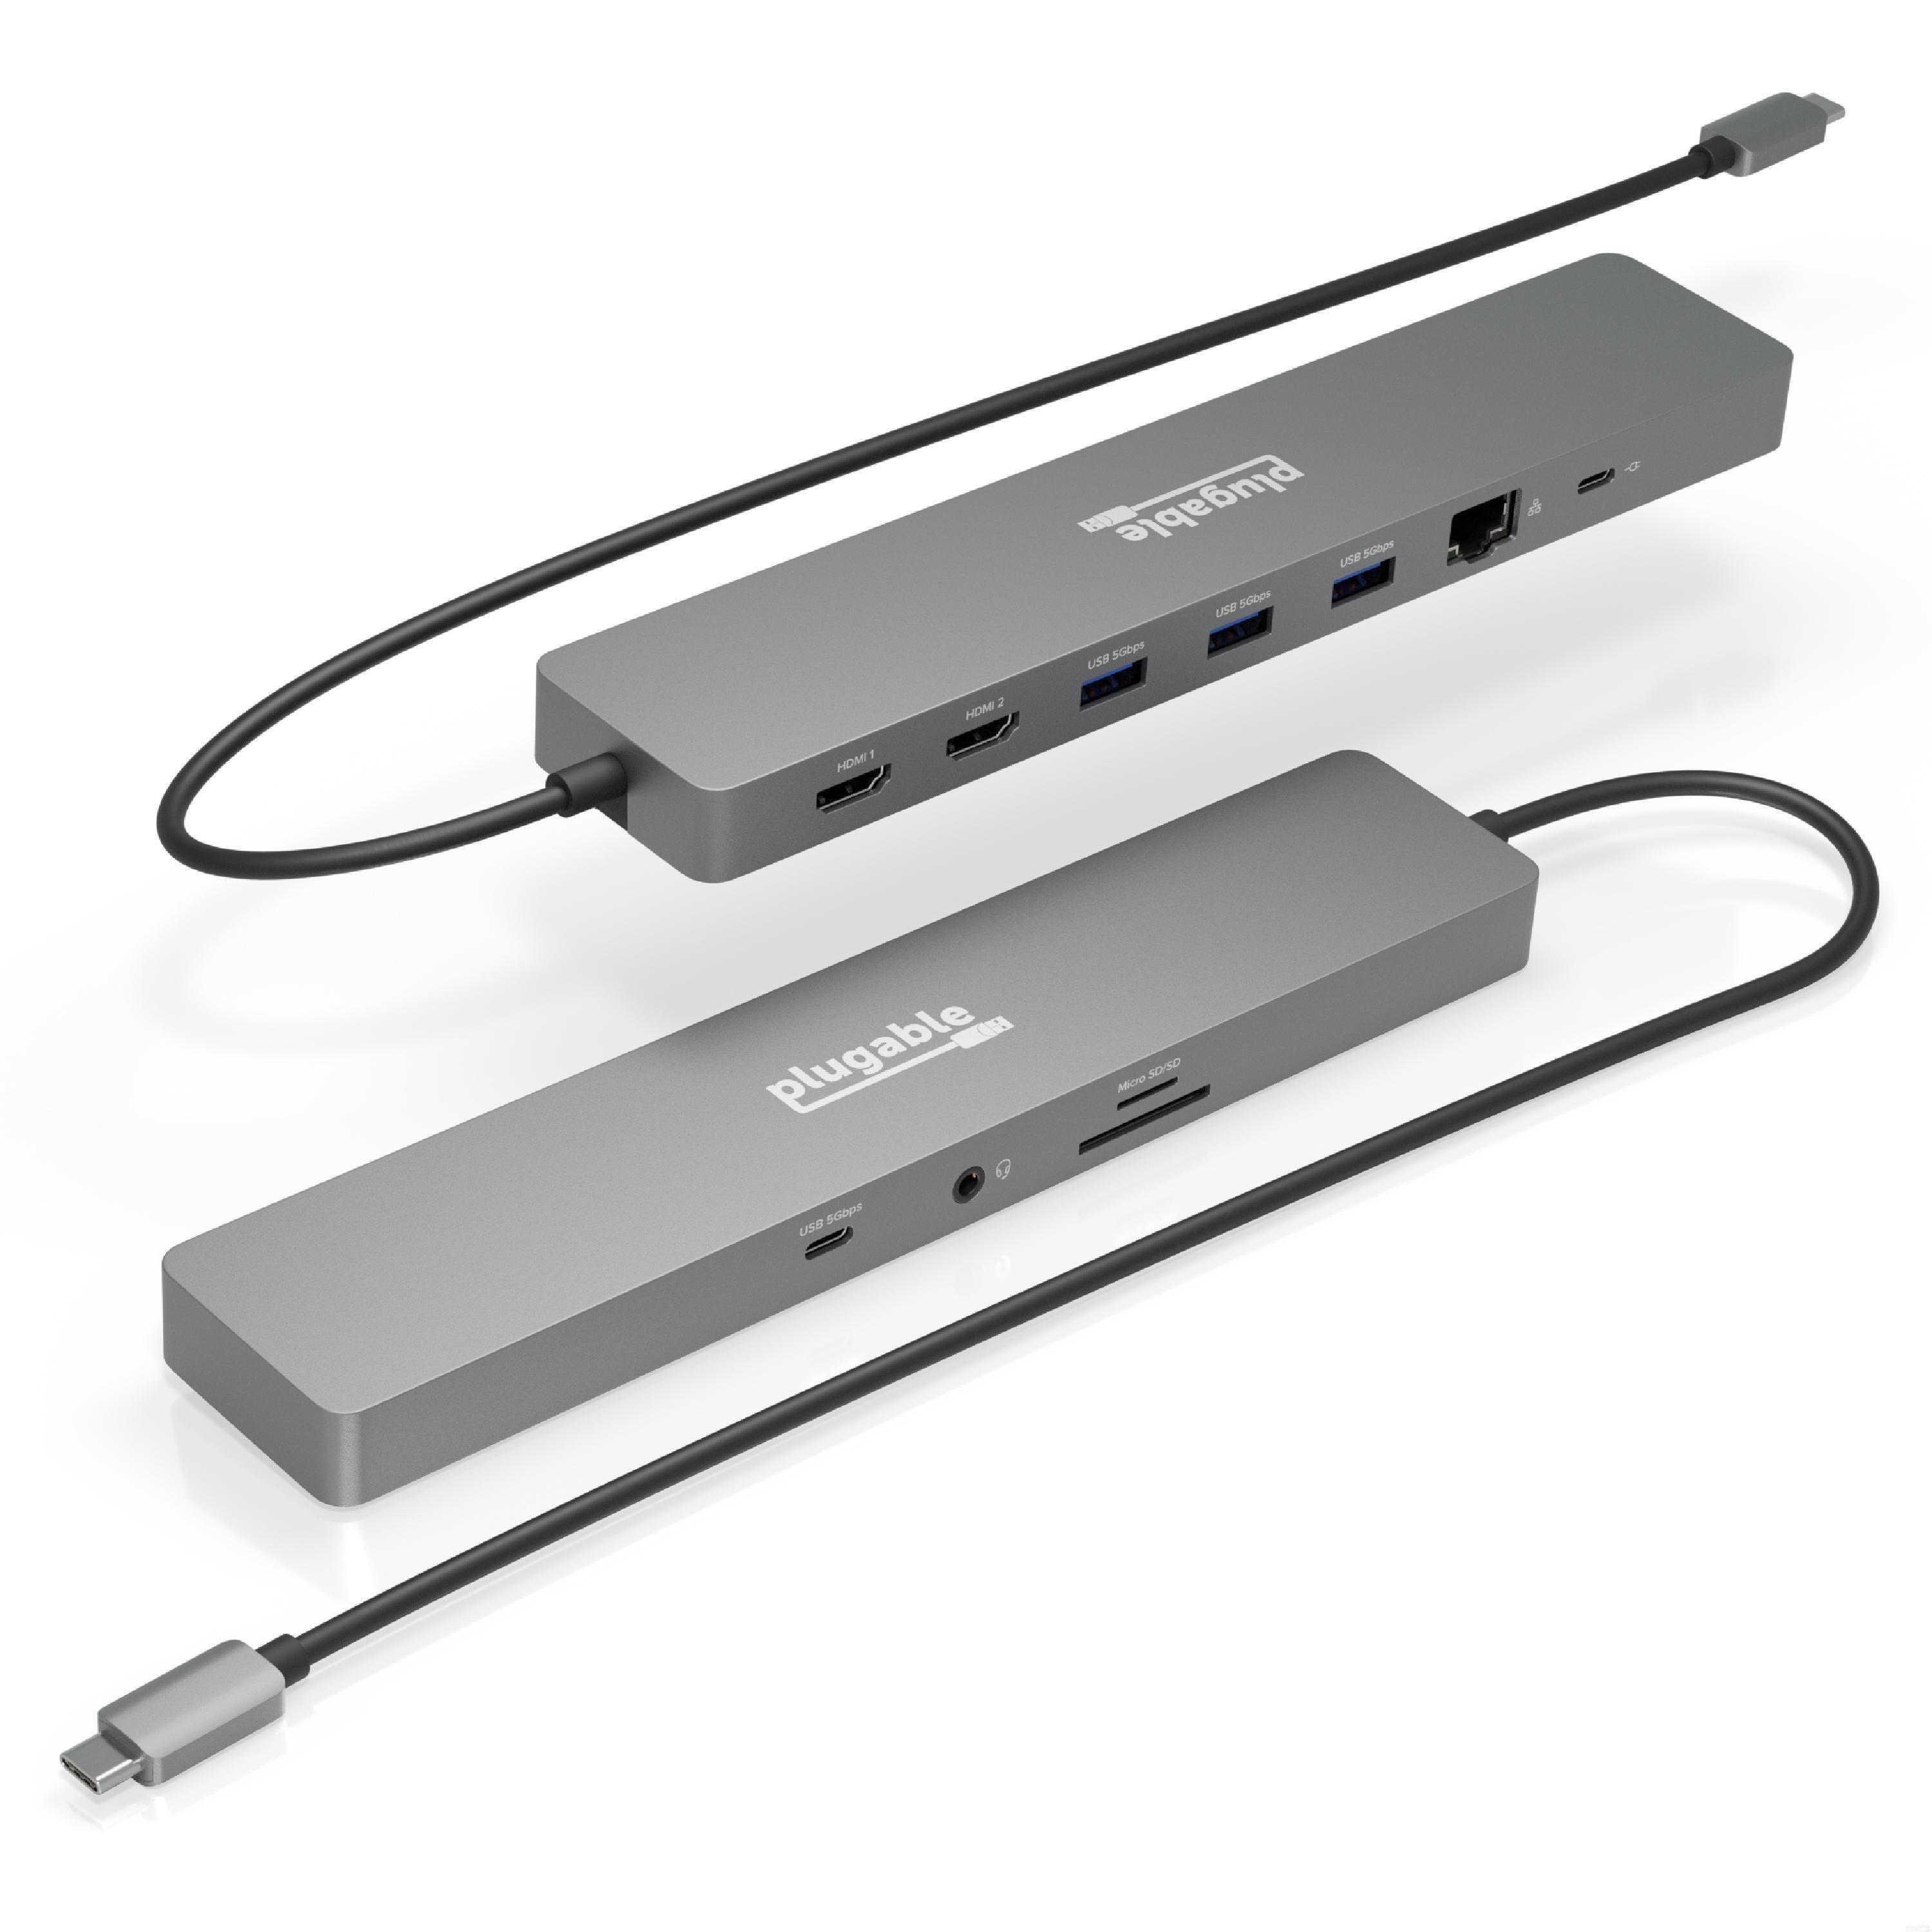 Plugable USB-C 11-in-1 Hub with Ethernet